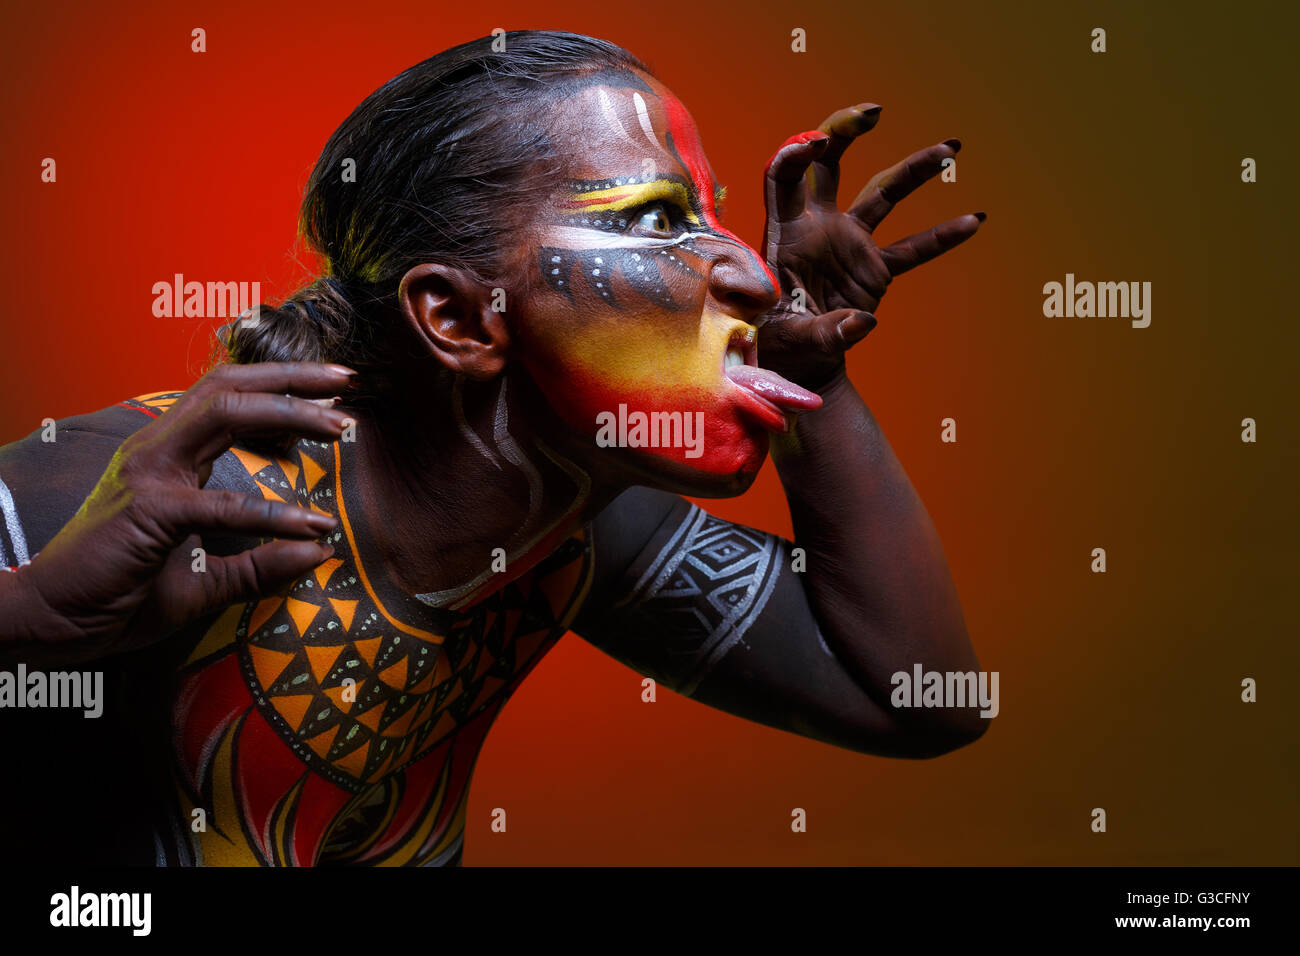 Bodypainting. Woman painted with ethnic patterns Stock Photo